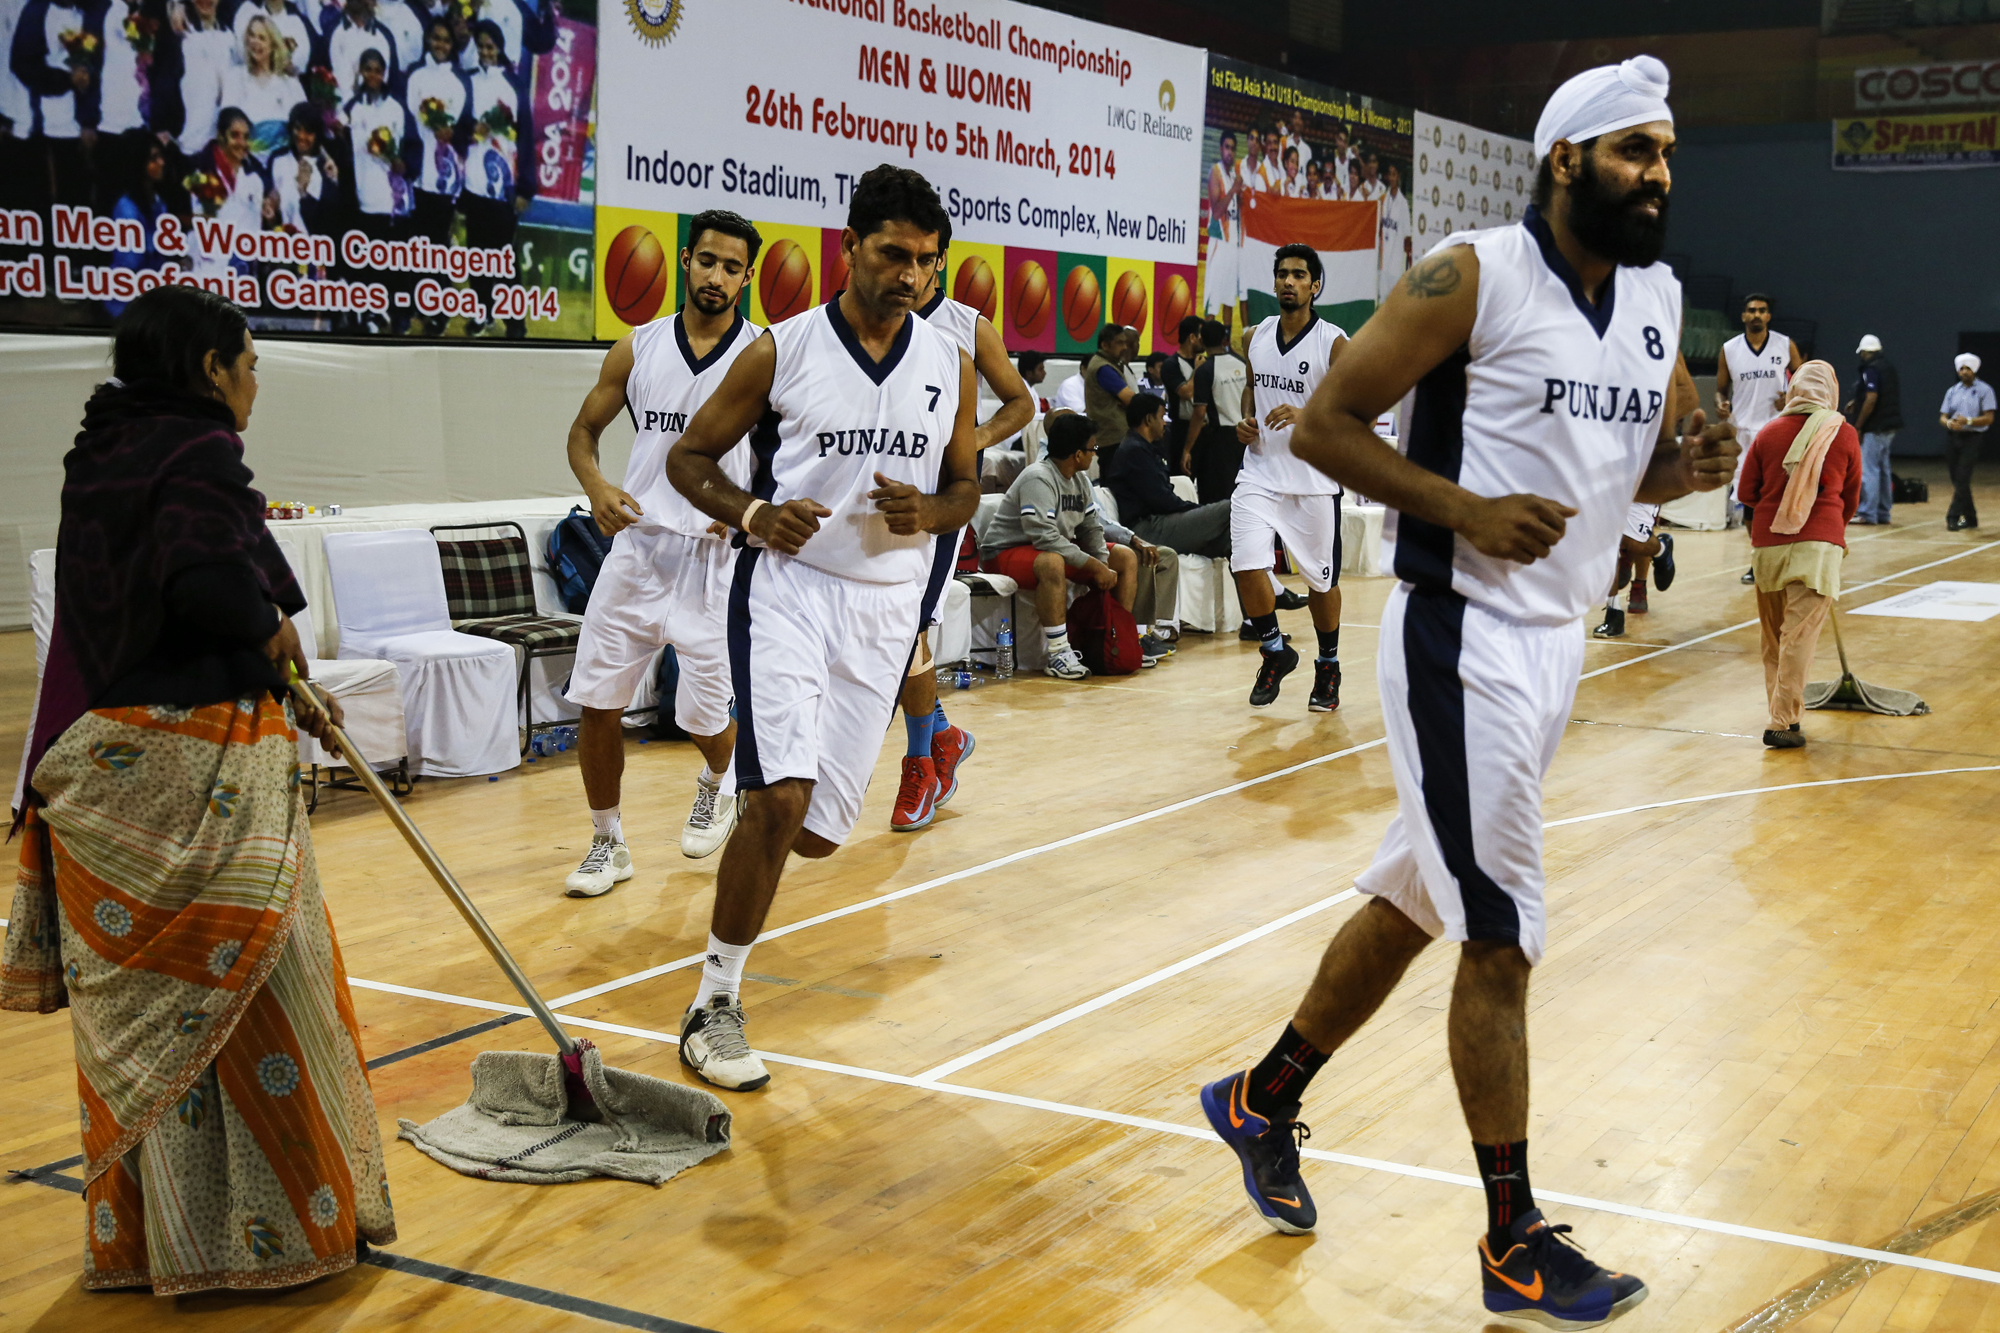 Dhillon Gur leads the Punjab team pre-game warmup up 64th Senior National Basketball Championship for Men and Women, Delhi 2014